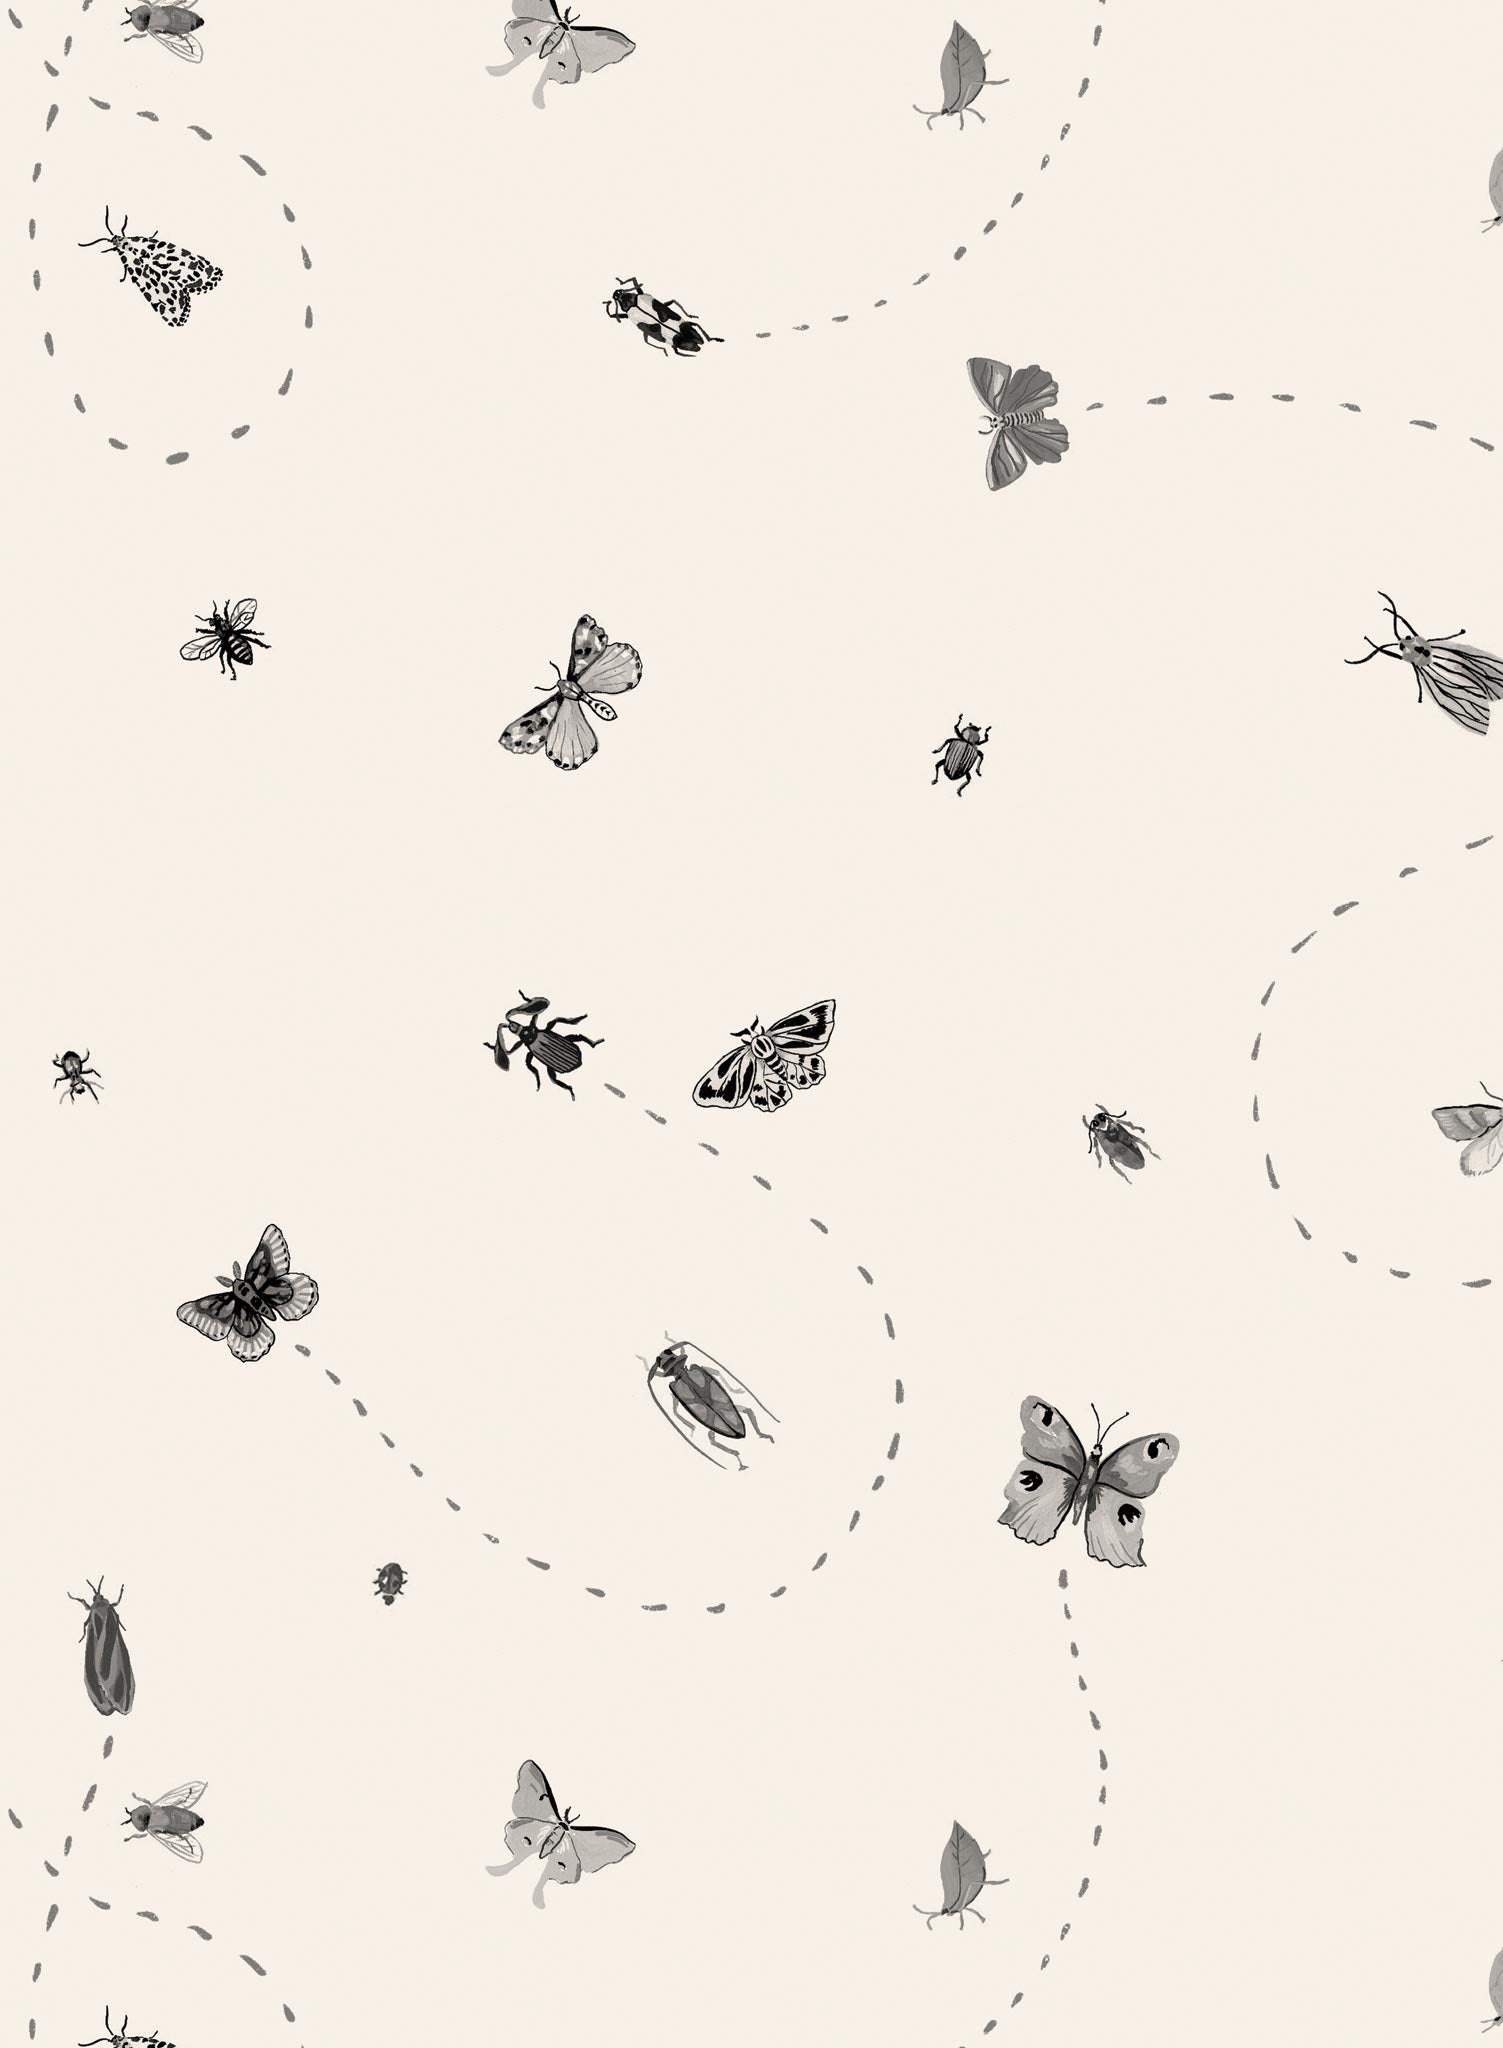 Itsy Bitsy is a Minimalist wallpaper by Opposite Wall of their favourite bugs.